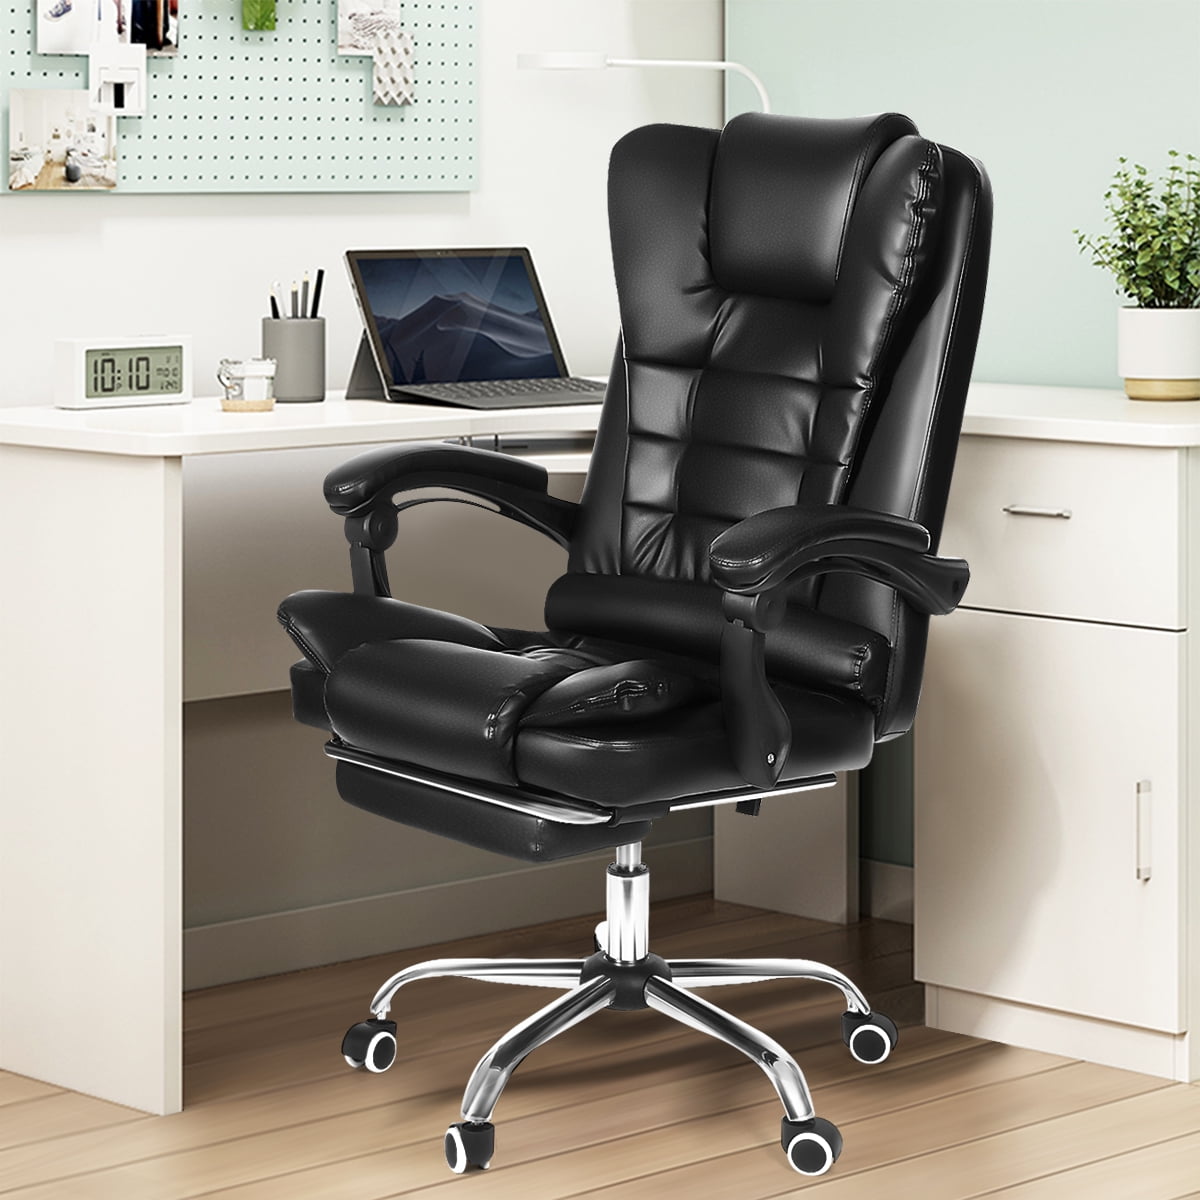 90°~135° Reclining High Back Office Chair,Big and Tall PU Leather